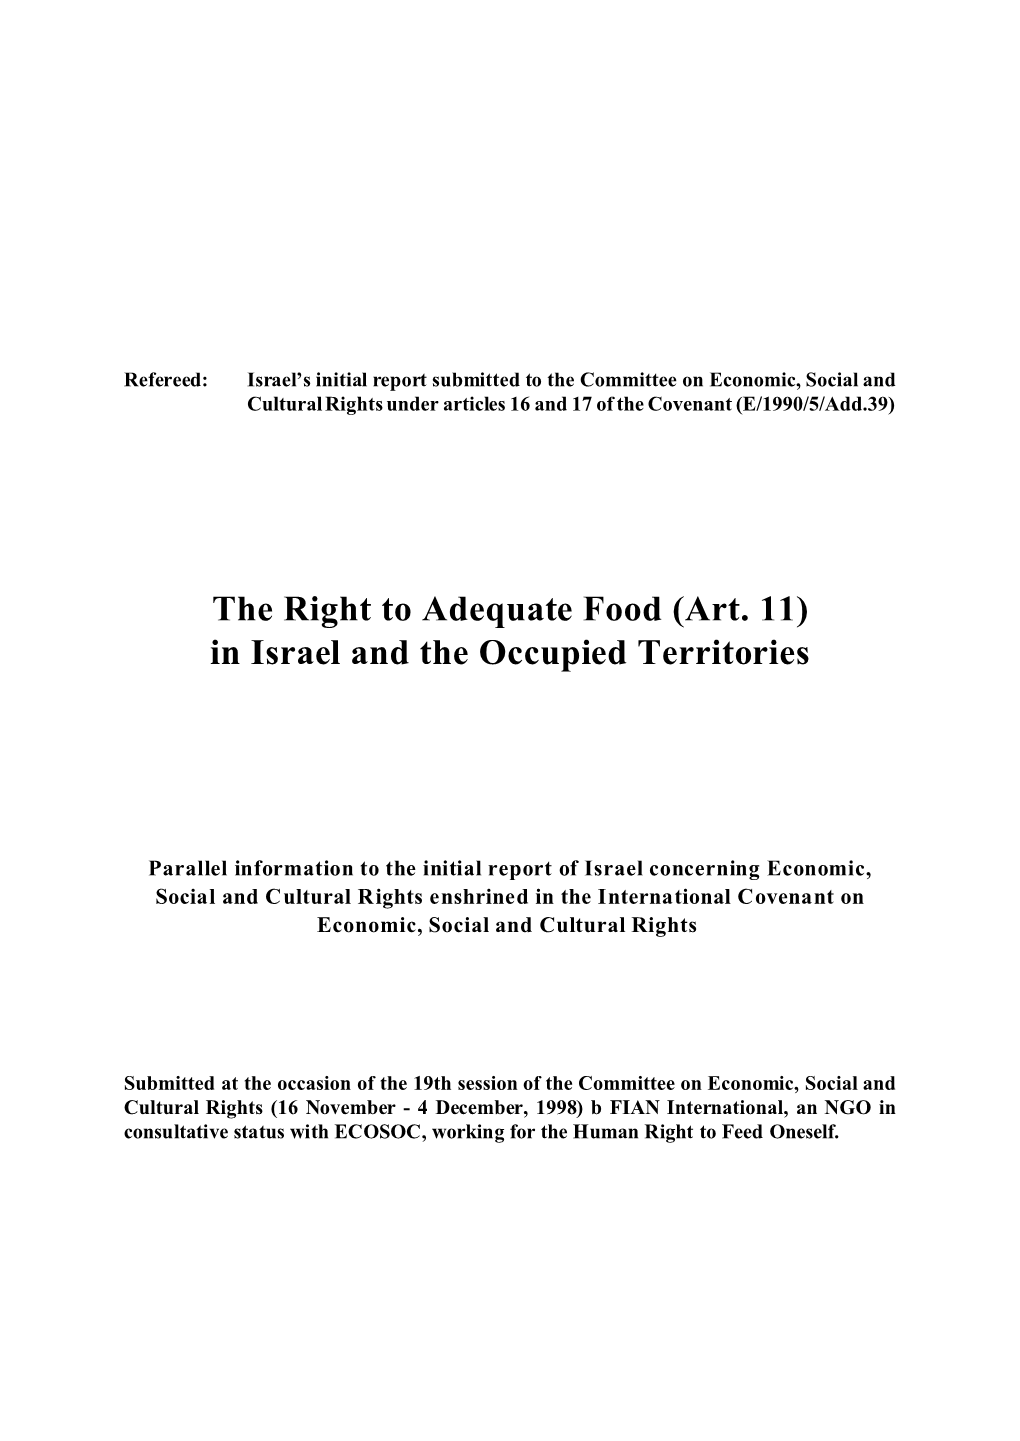 The Right to Adequate Food (Art. 11) in Israel and the Occupied Territories